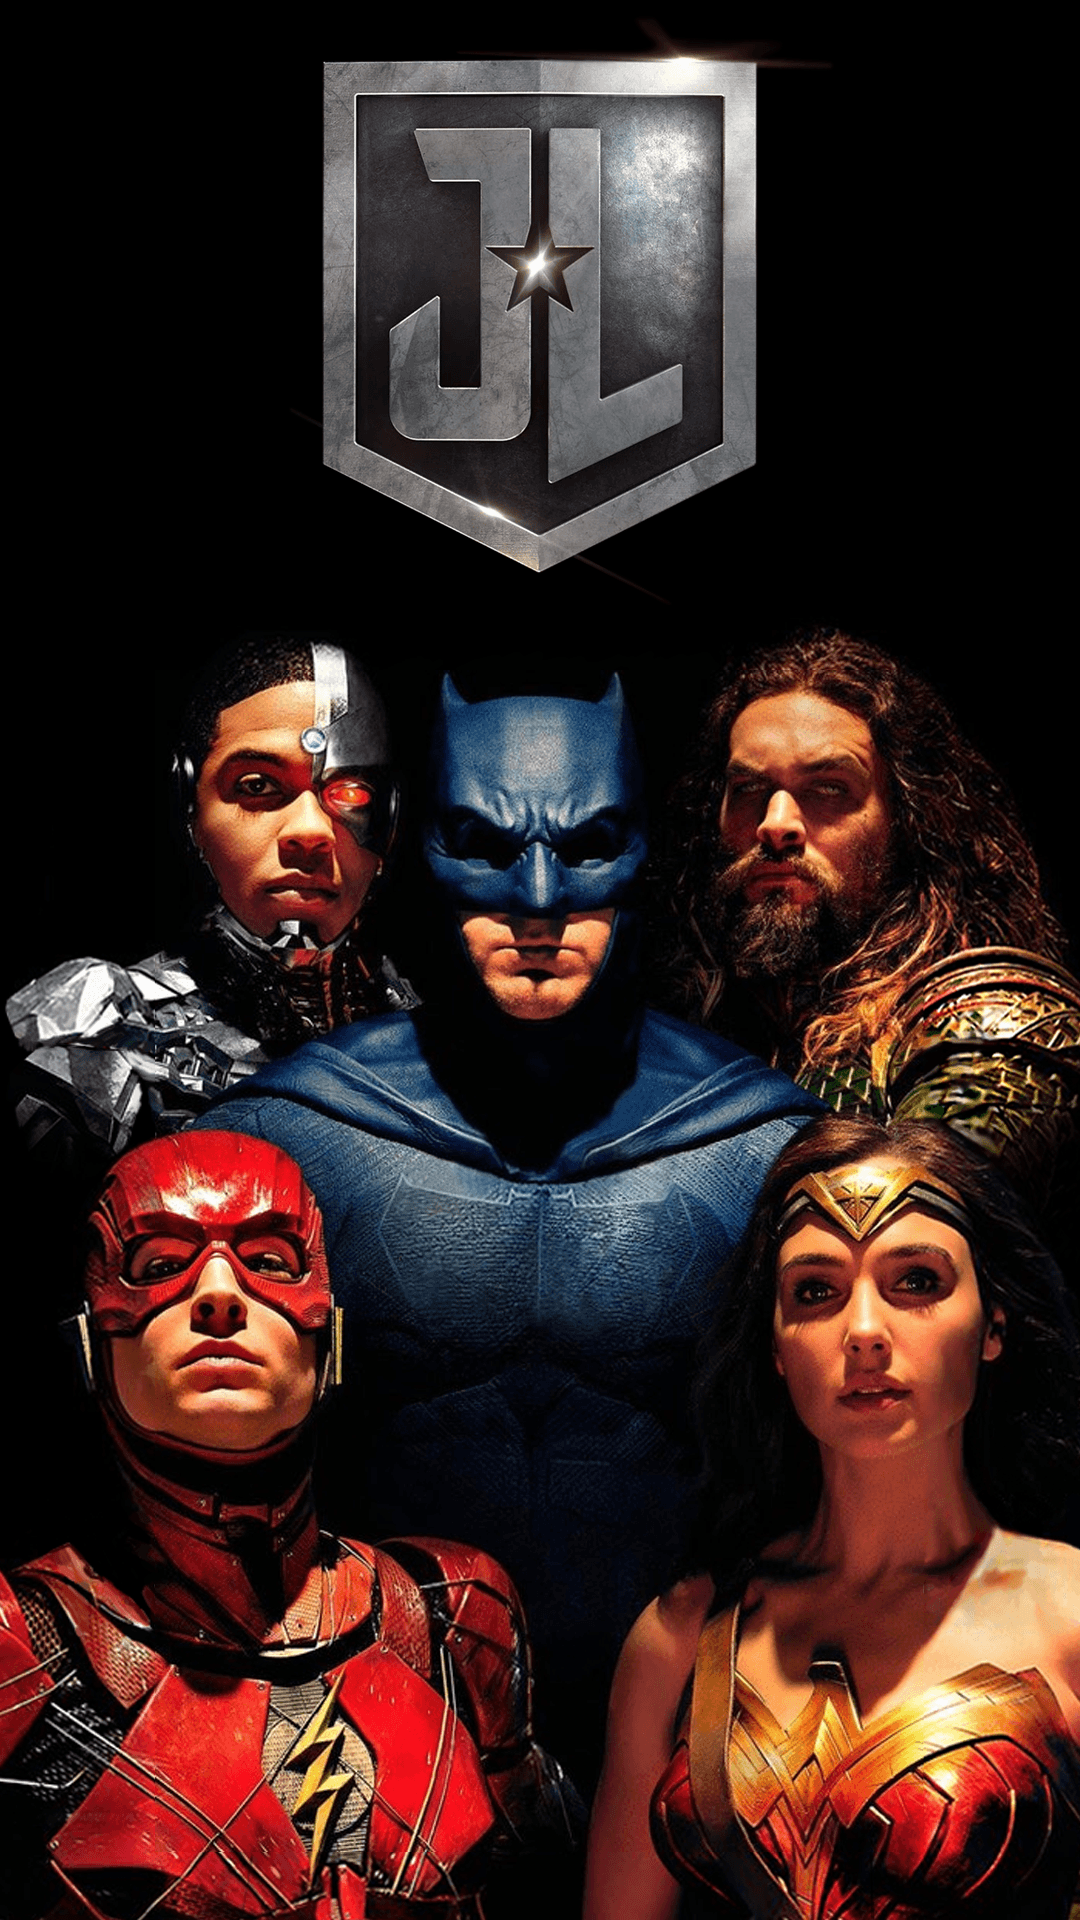 FANART: Justice League Phone Wallpaper from the new poster